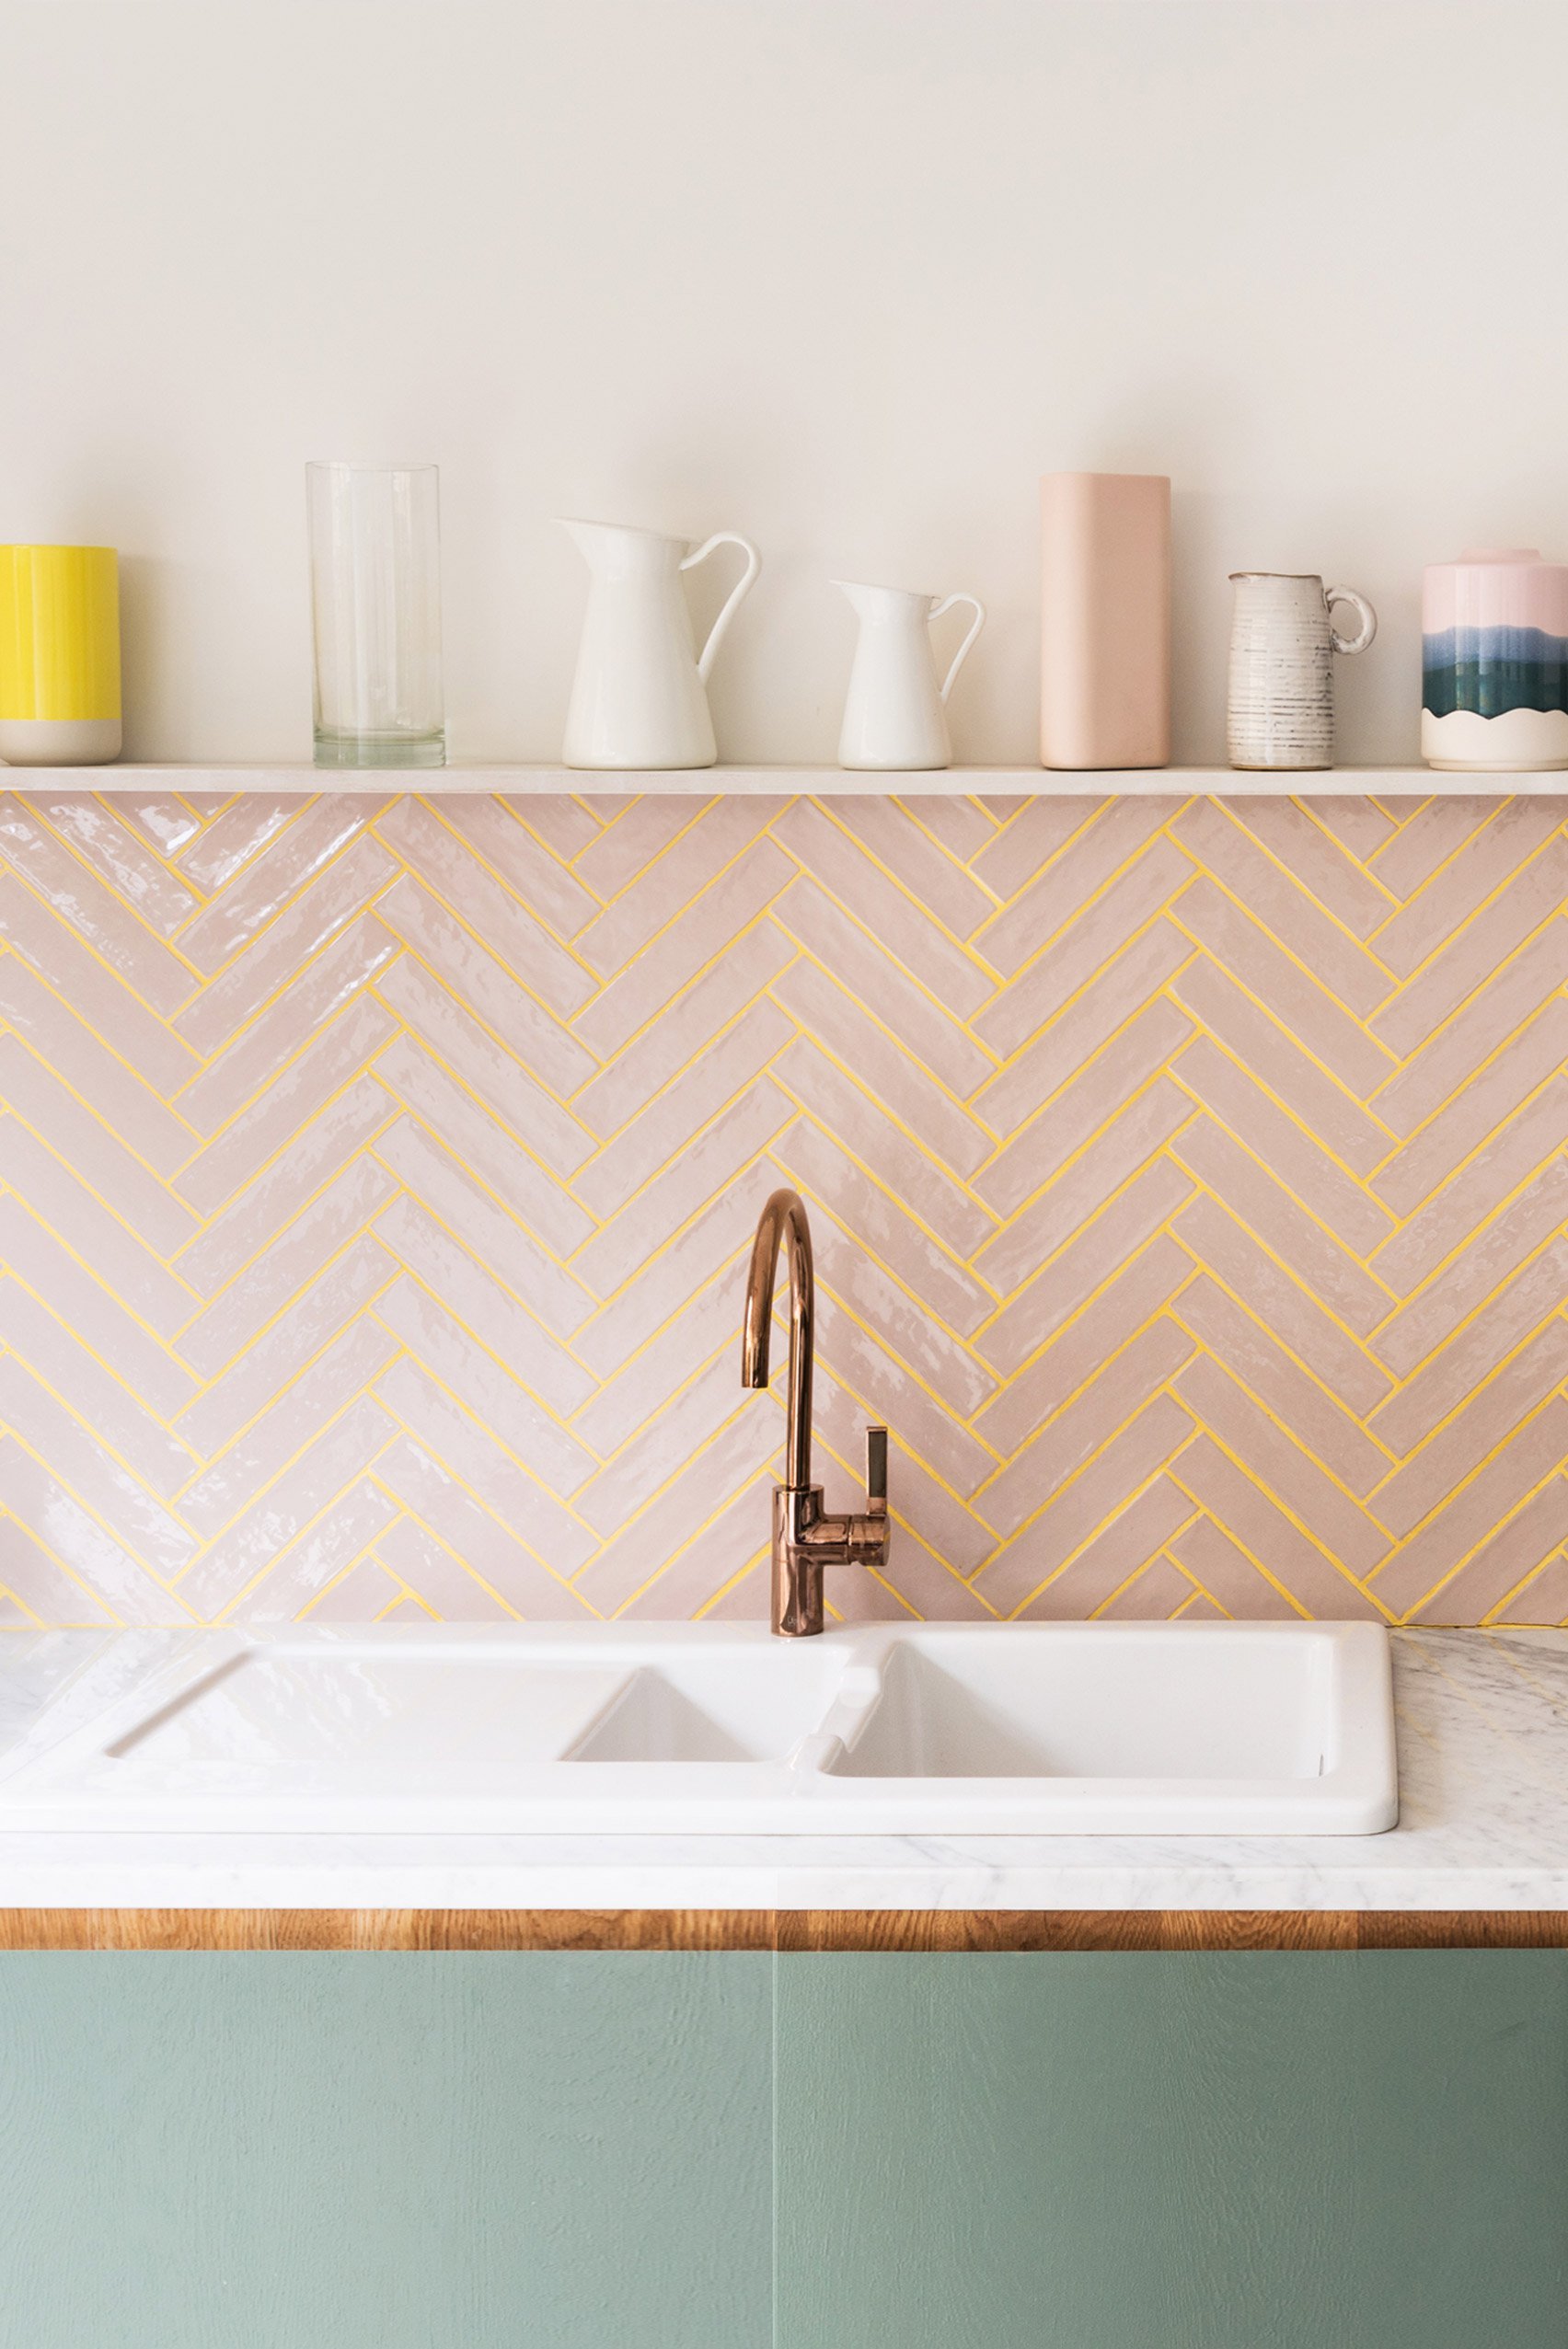 Herringbone Tile Is A Good Choice For An EyeCatchy